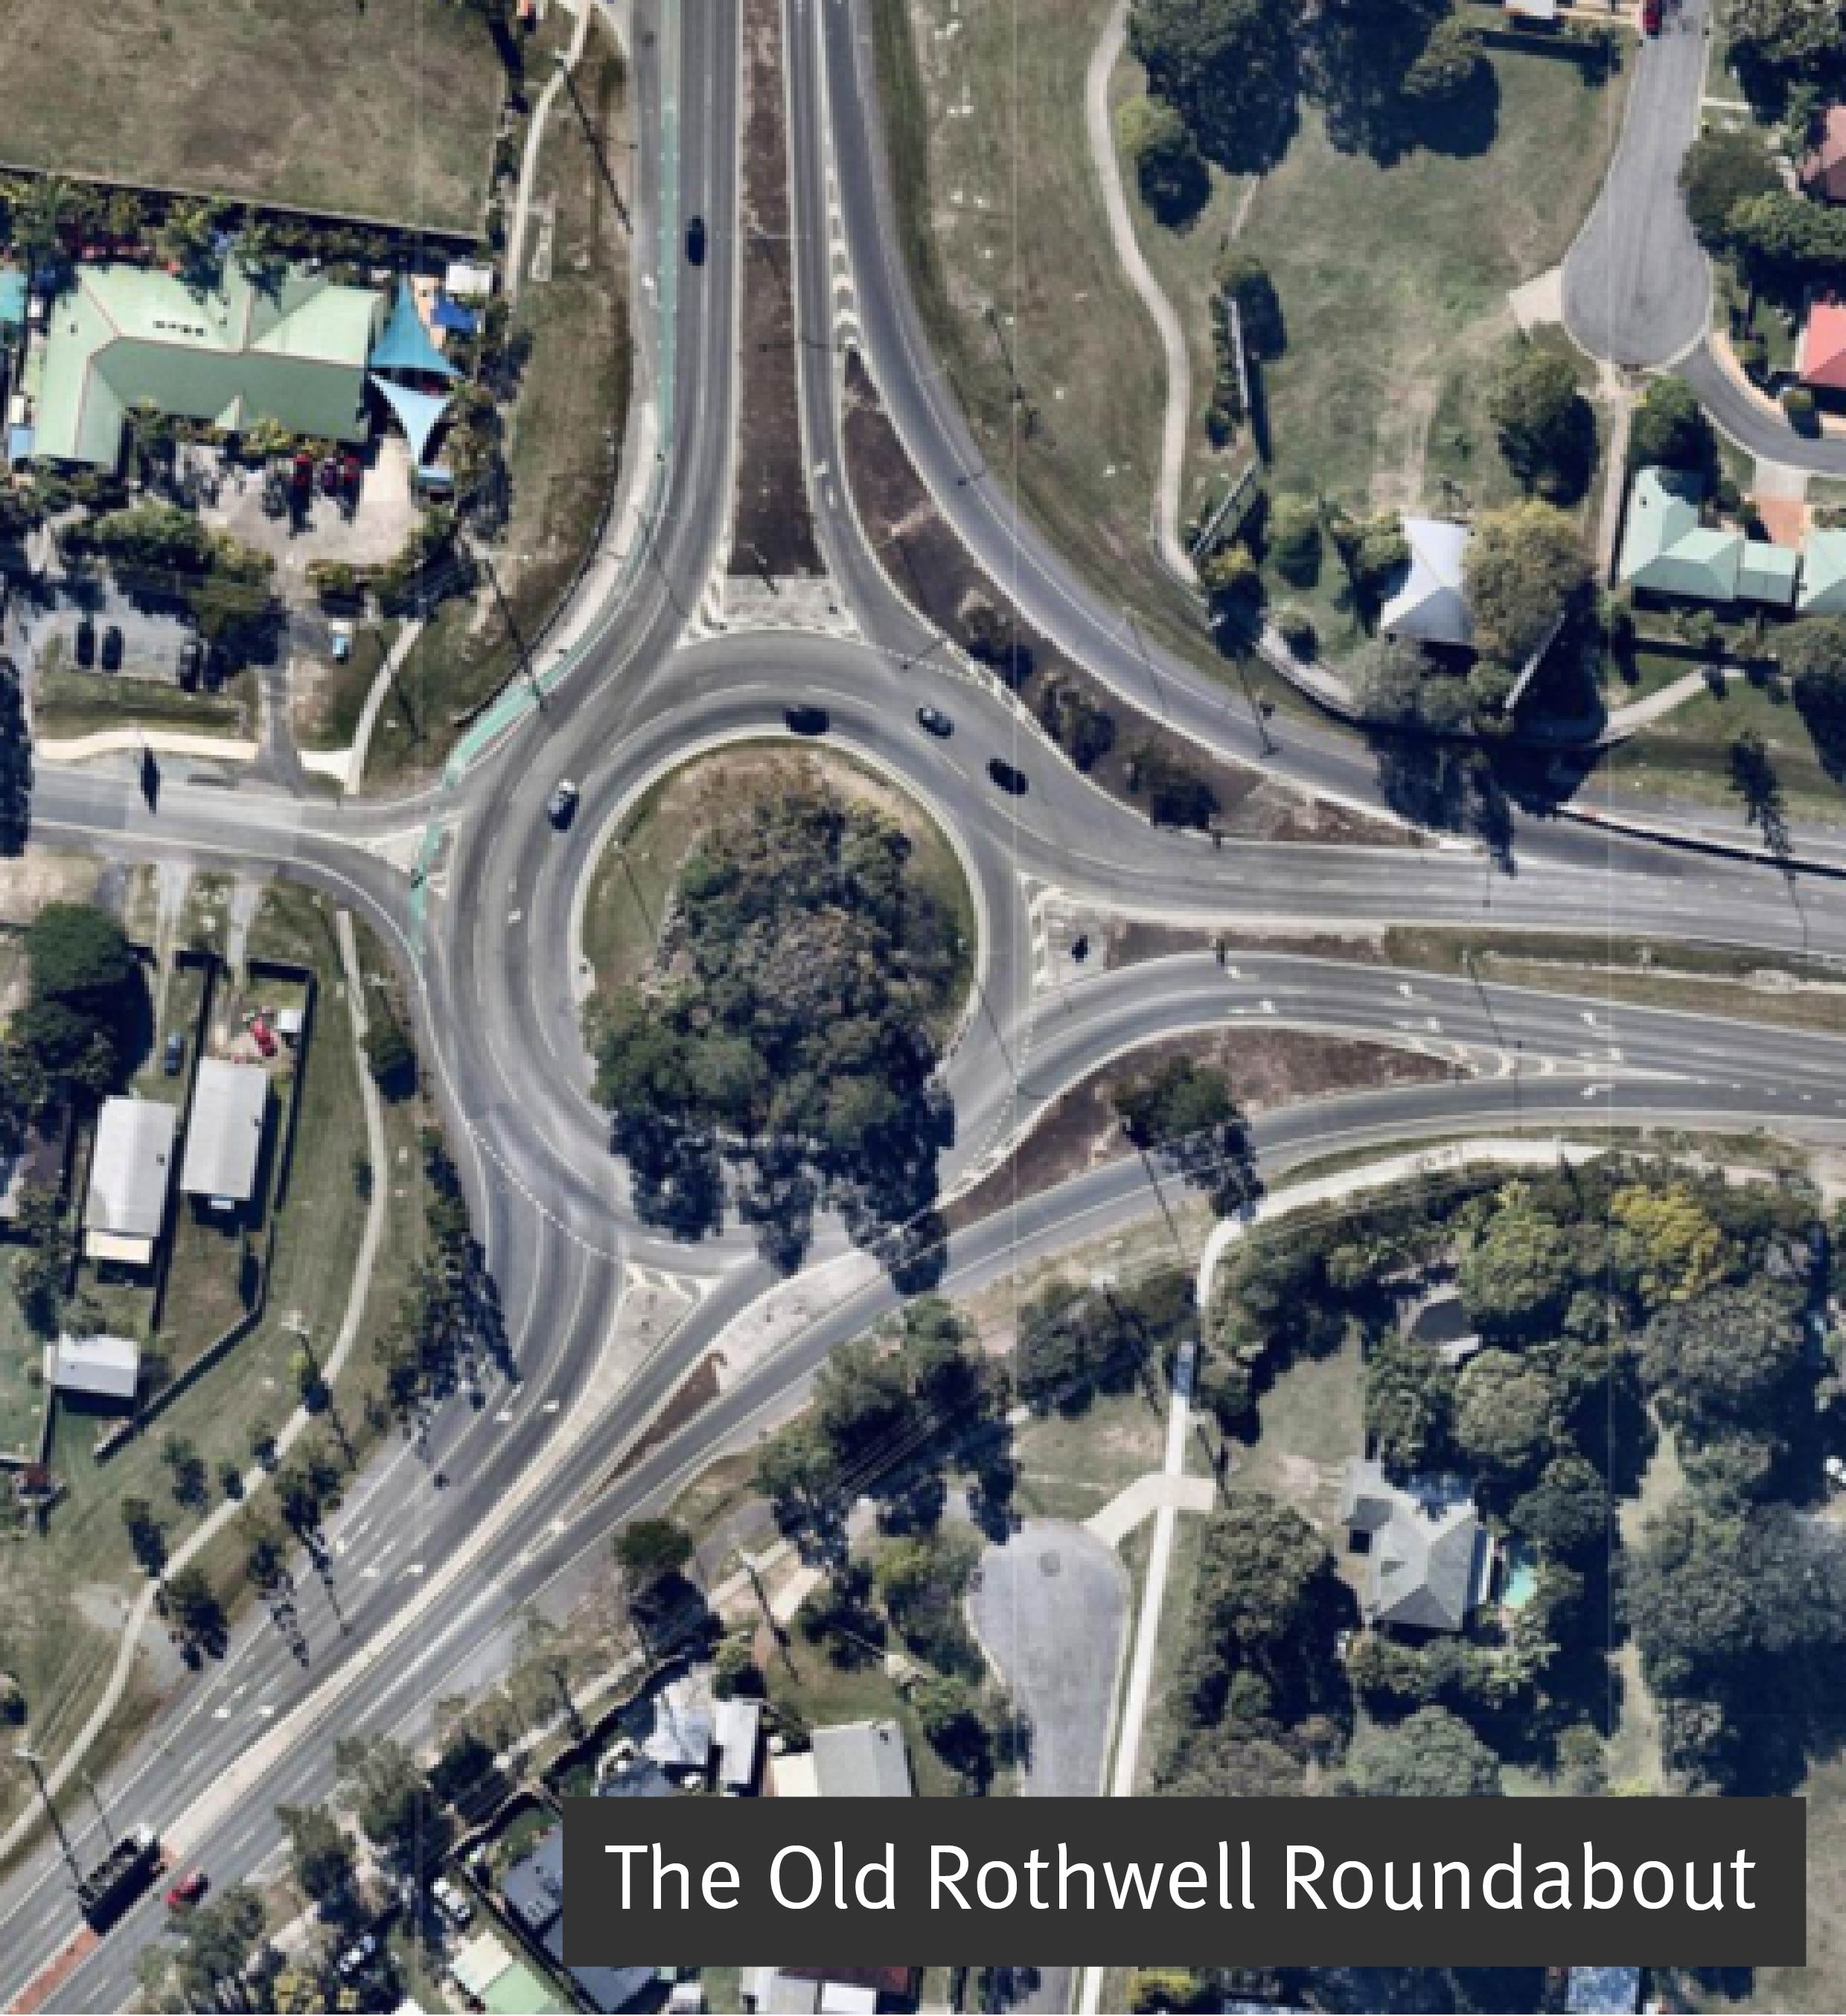 The old Rothwell roundabout